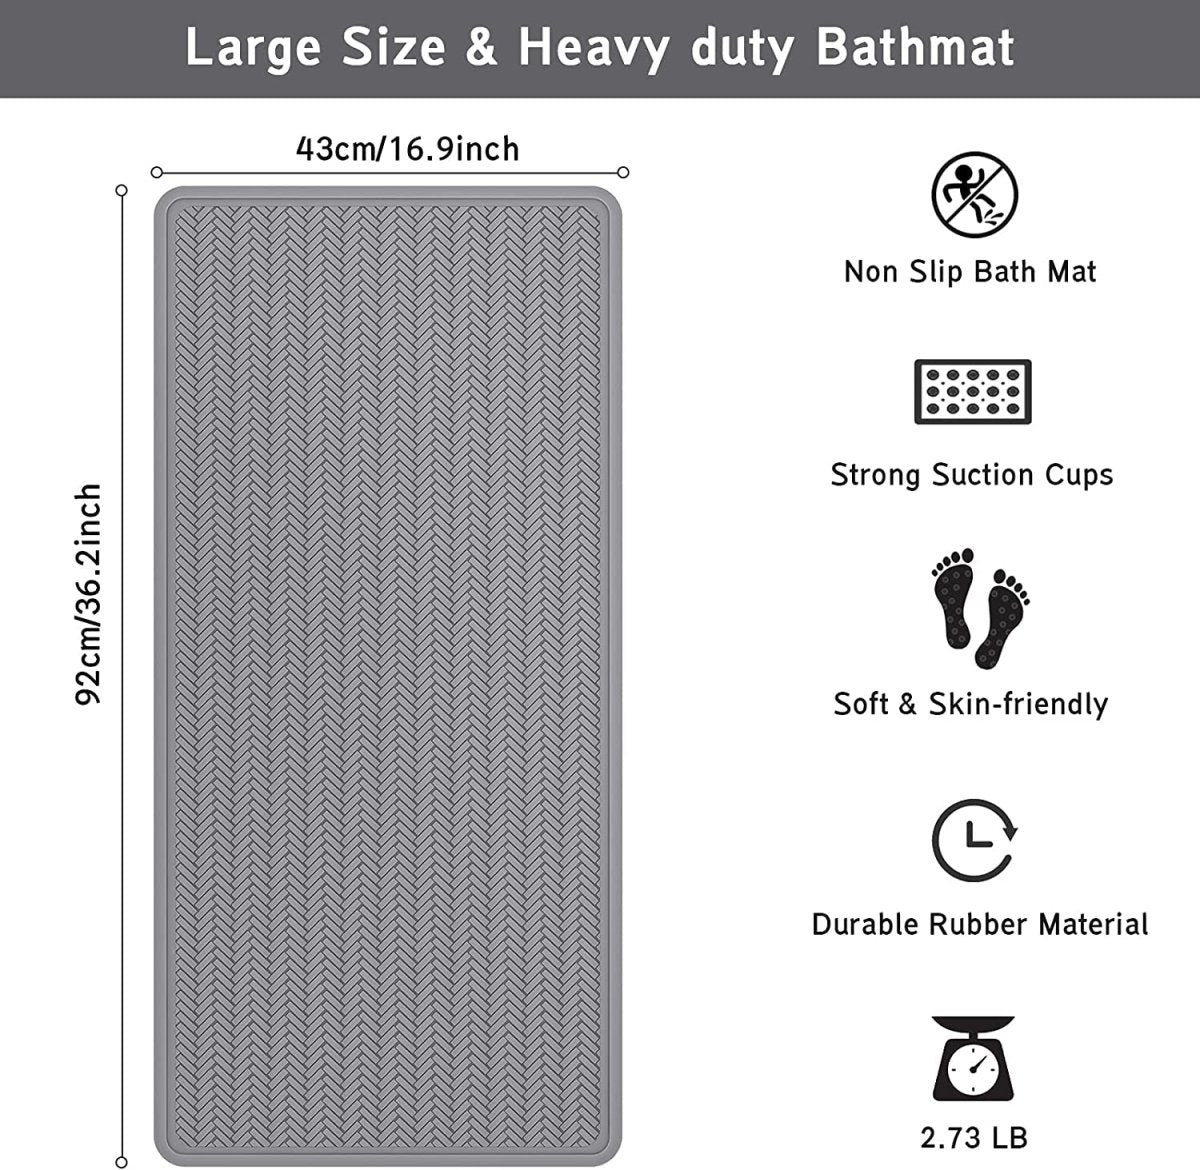 https://cdn.shopify.com/s/files/1/0619/6307/5793/products/extra-long-43x92-cm-rubber-non-slip-bathtub-shower-mat-soft-mat-for-bathroom-tub-with-strong-suction-cups-b9aa4ee3-e1d8-469a-b4c1-b7b4f726fe9d-995322.jpg?v=1683321170&width=1200